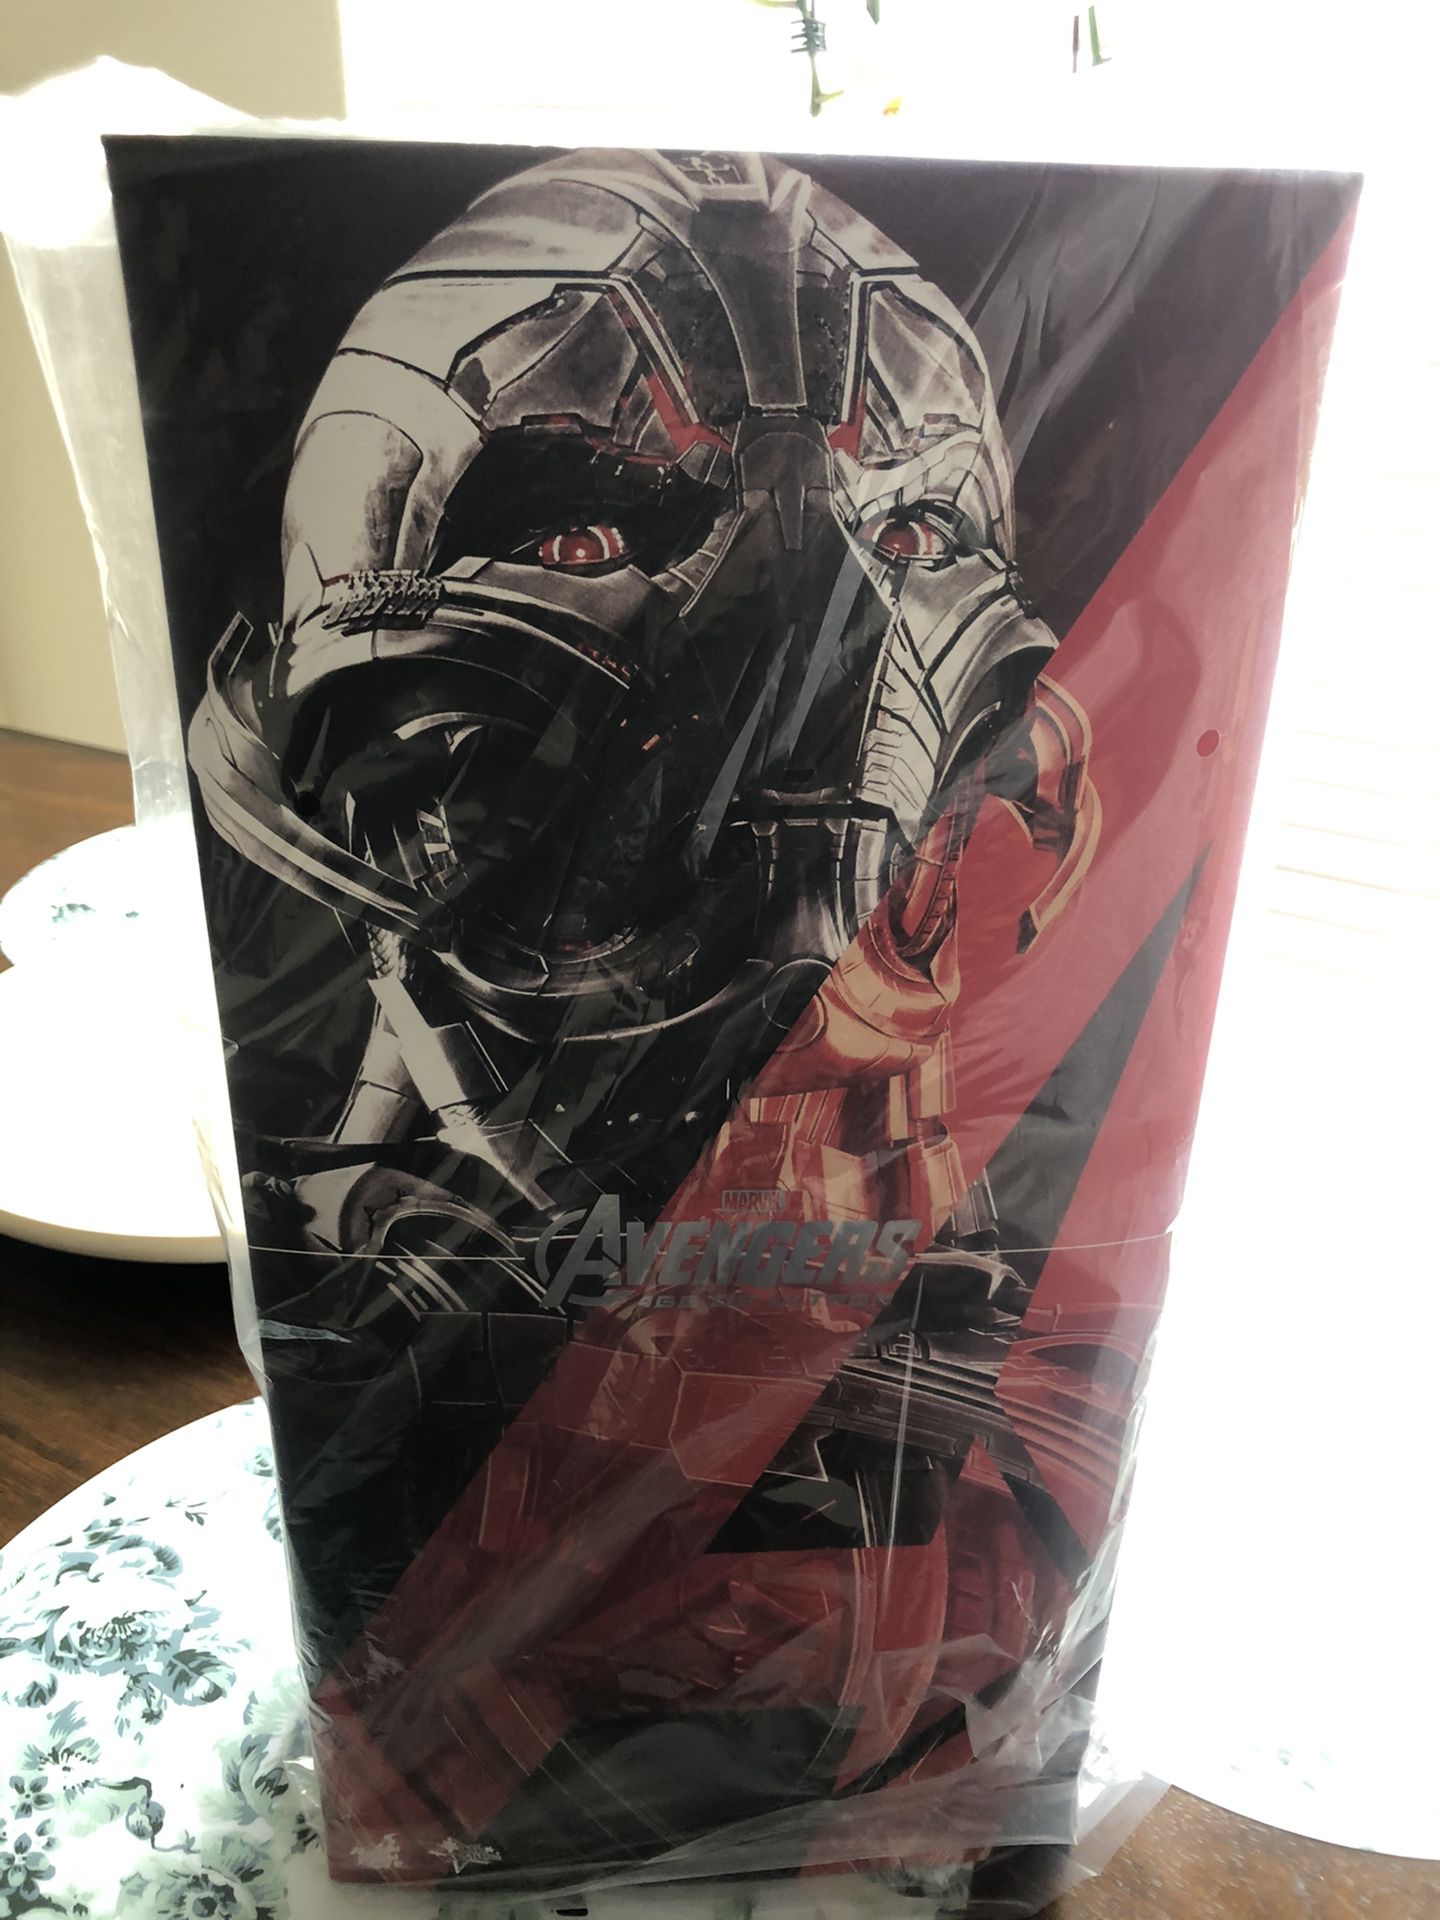 Hot toys Ultron ! Brand new never opened . Light up feature !